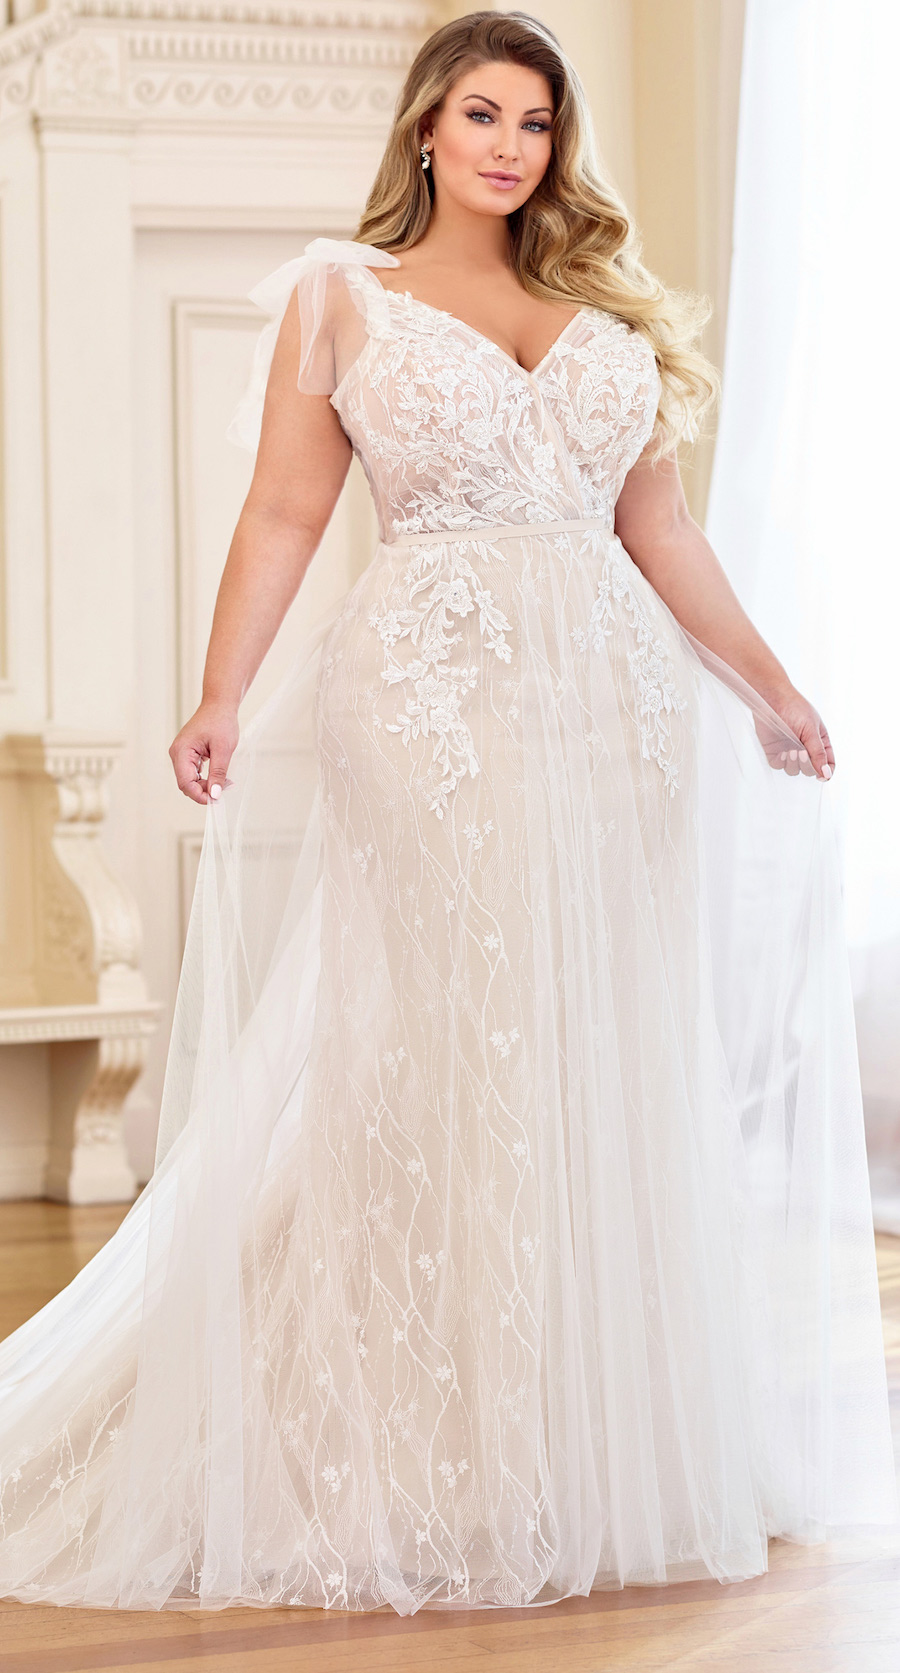 Plus Size Wedding Dresses For The Most Beautiful And Curvy Brides My Xxx Hot Girl